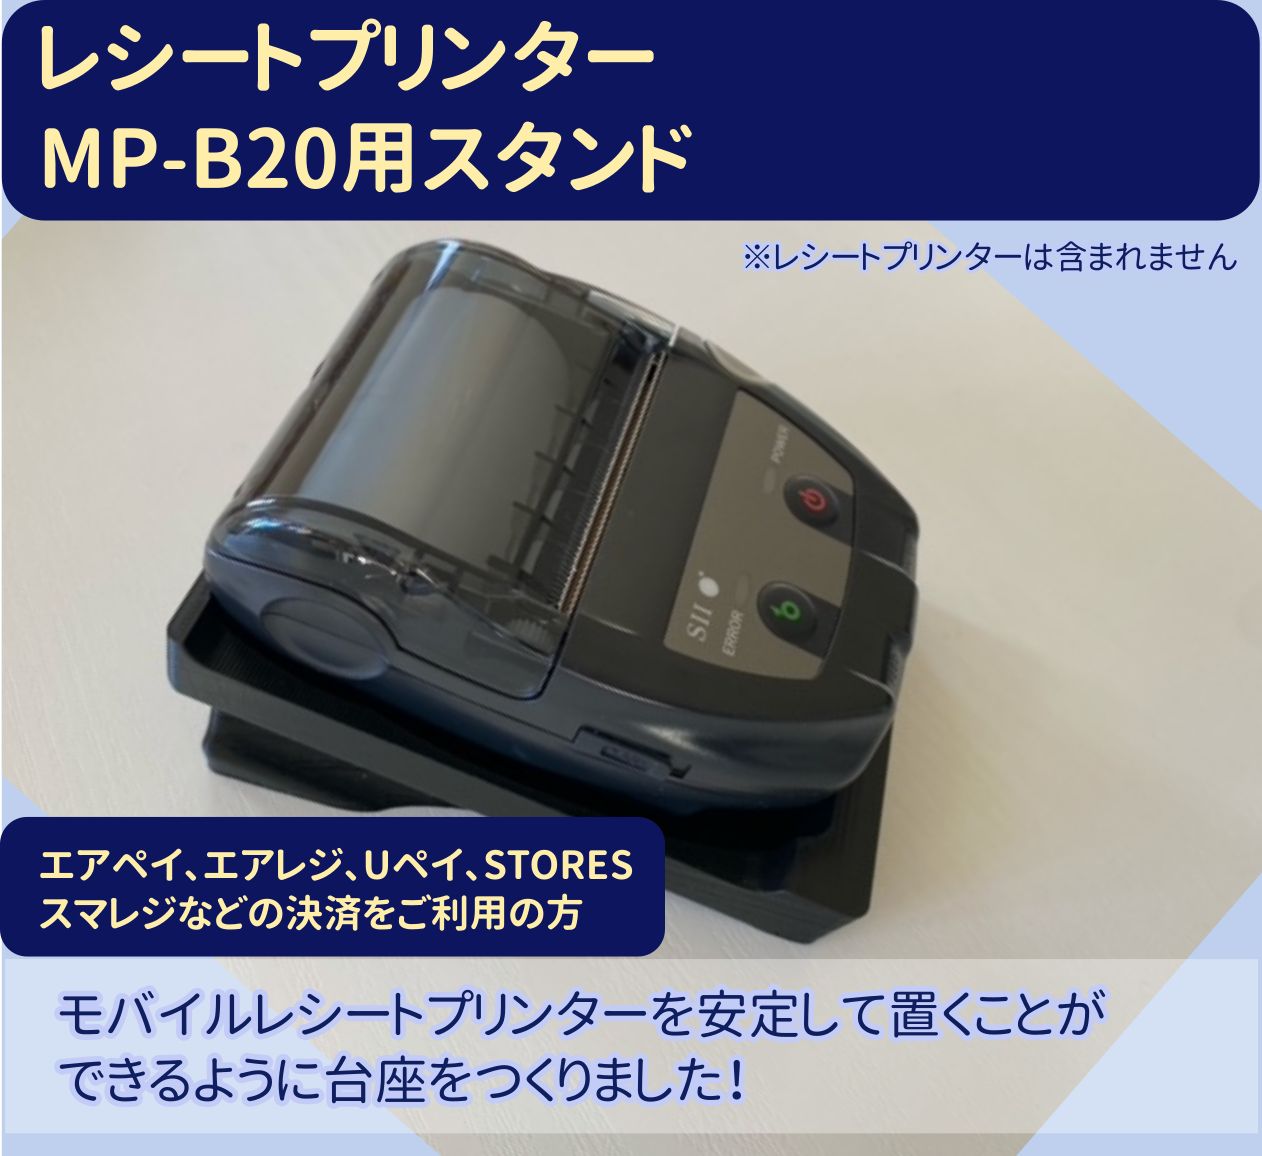 Airレジ（mPOP) AirPAYカードリーダー付き - その他